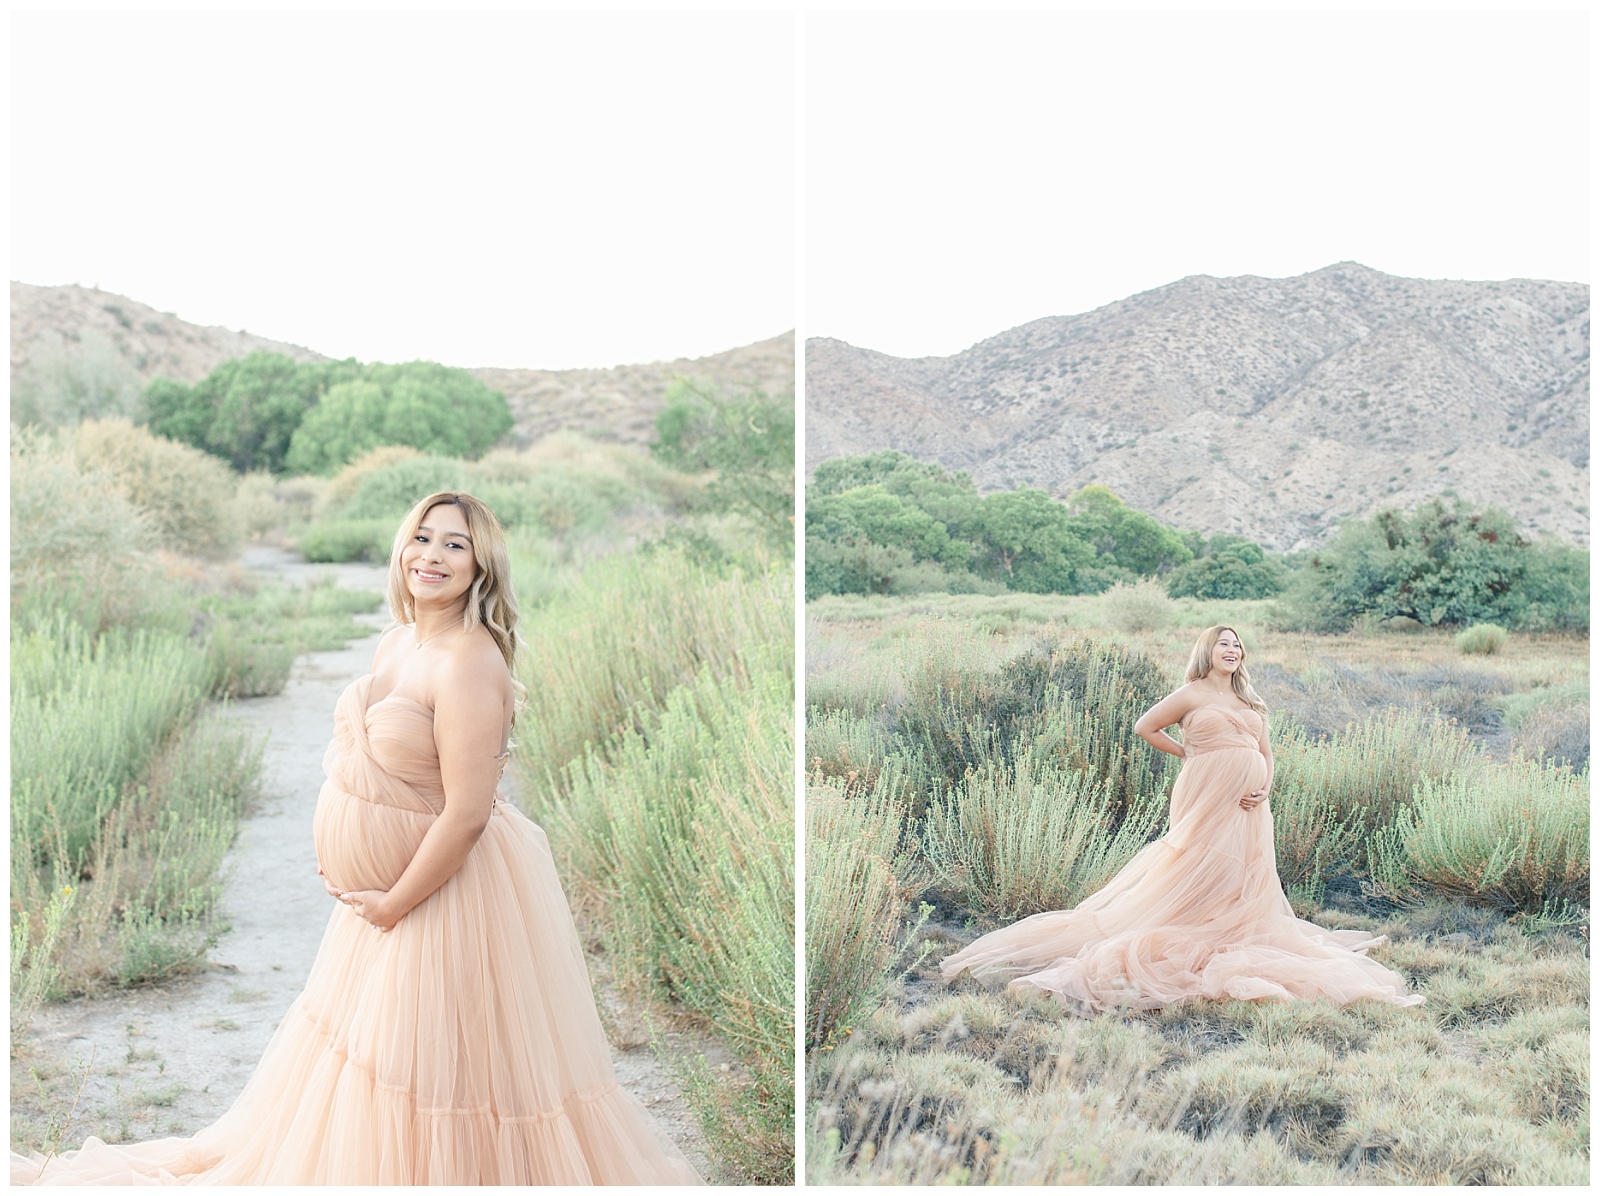 Luxury Maternity session at big morongo canyon preserve joshua tree California by bright and colorful photographer elizabeth kane light and airy photography 